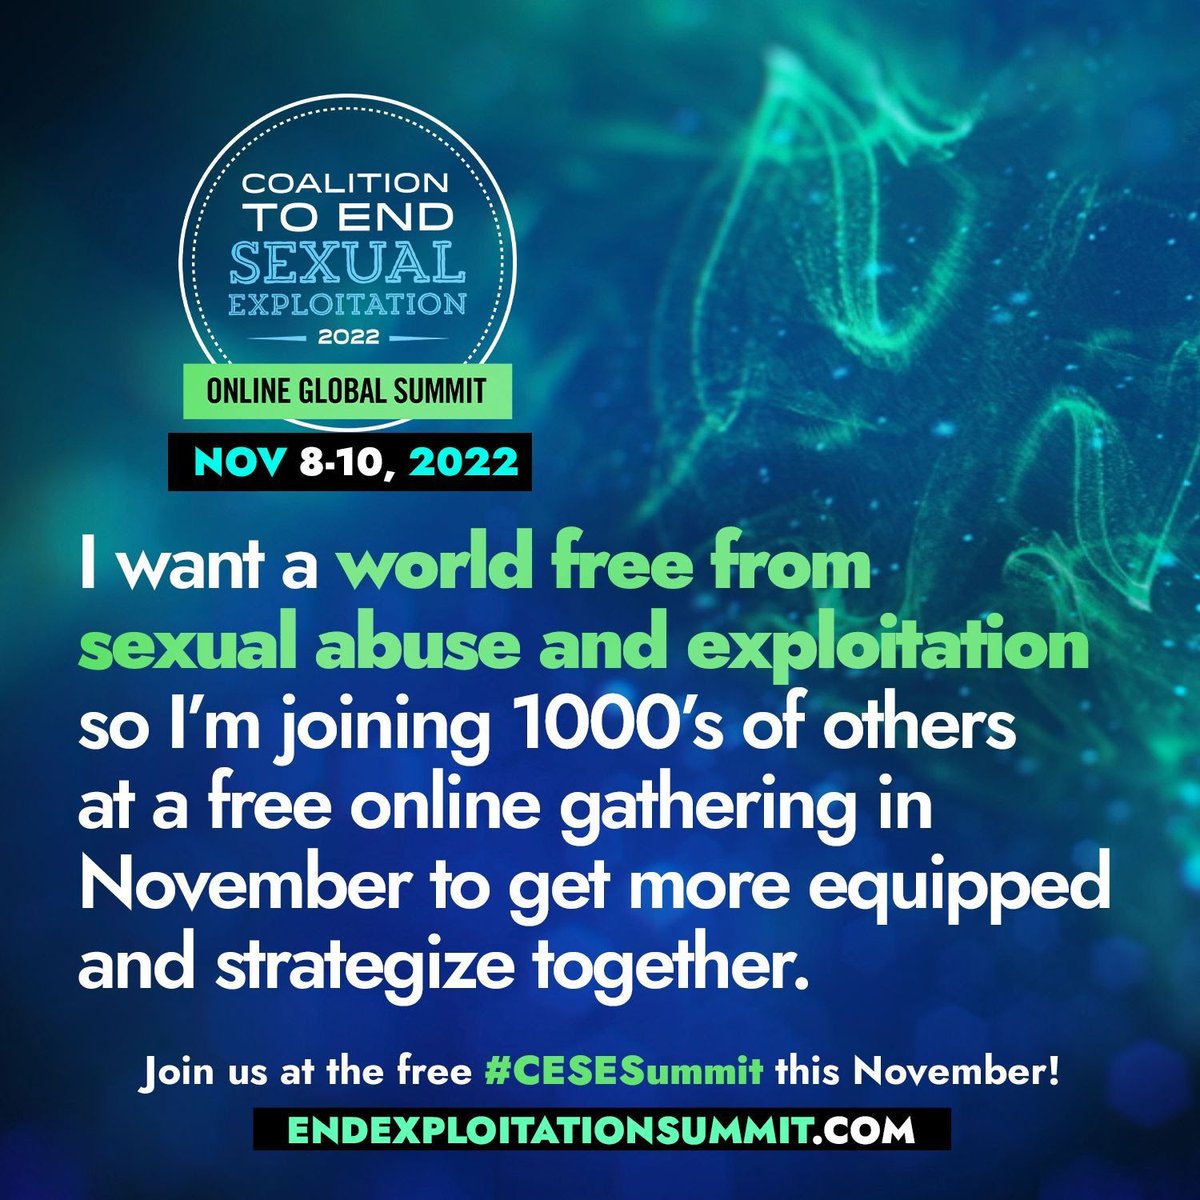 On November 8-10, 2022, the National Center on Sexual Exploitation is having a FREE Coalition to End Sexual Exploitation (CESE) Online Global Summit. Below is the registration link if you would like to attend. endsexualexploitation.org/cese-summit-20…